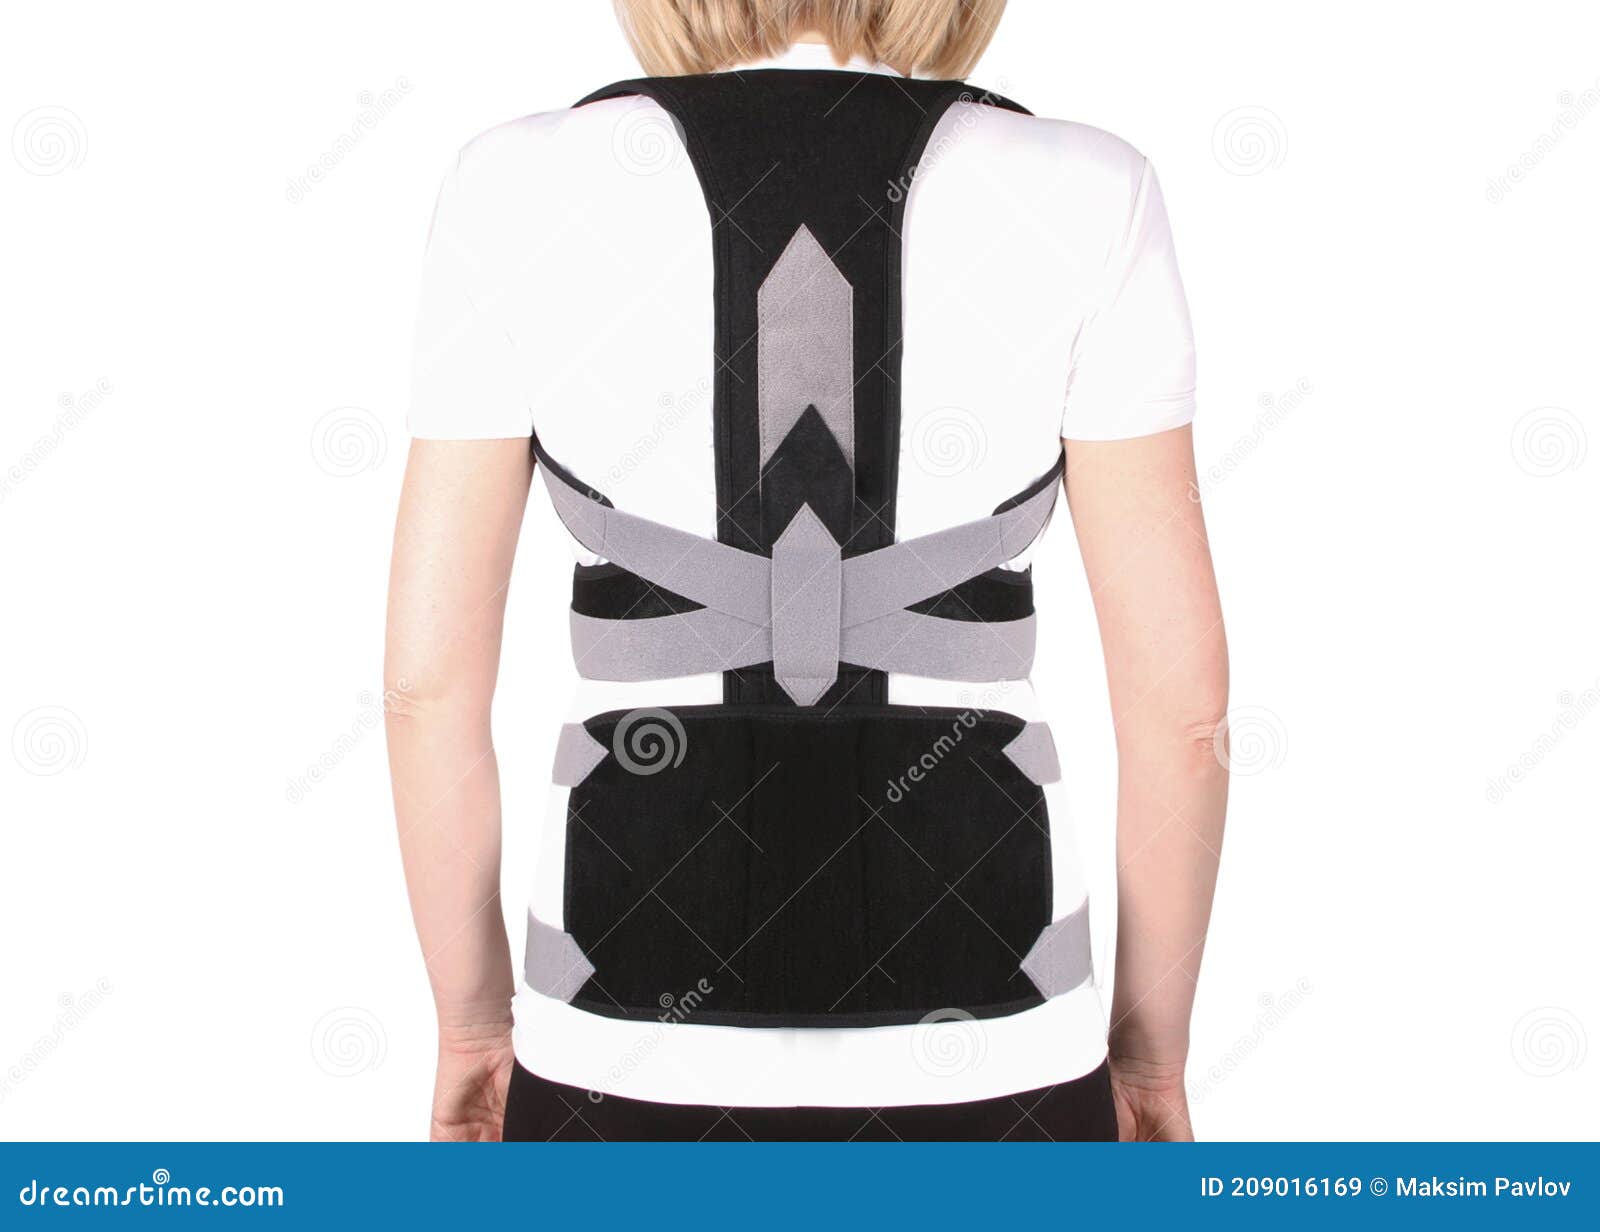 Back brace Free Stock Photos, Images, and Pictures of Back brace